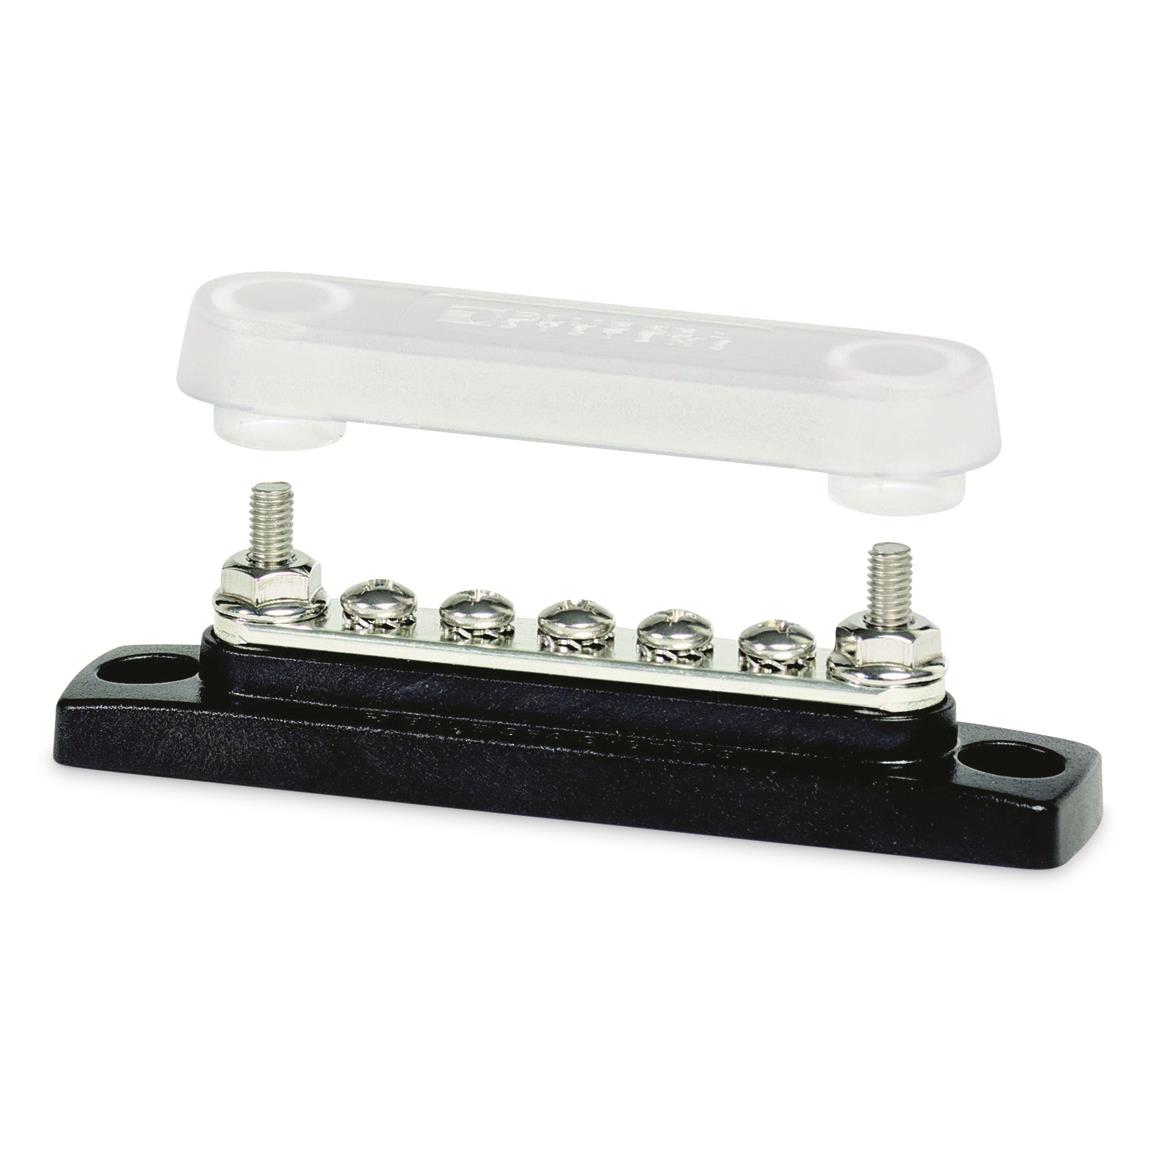 Common 100A Mini BusBar, 5 Gang with Cover